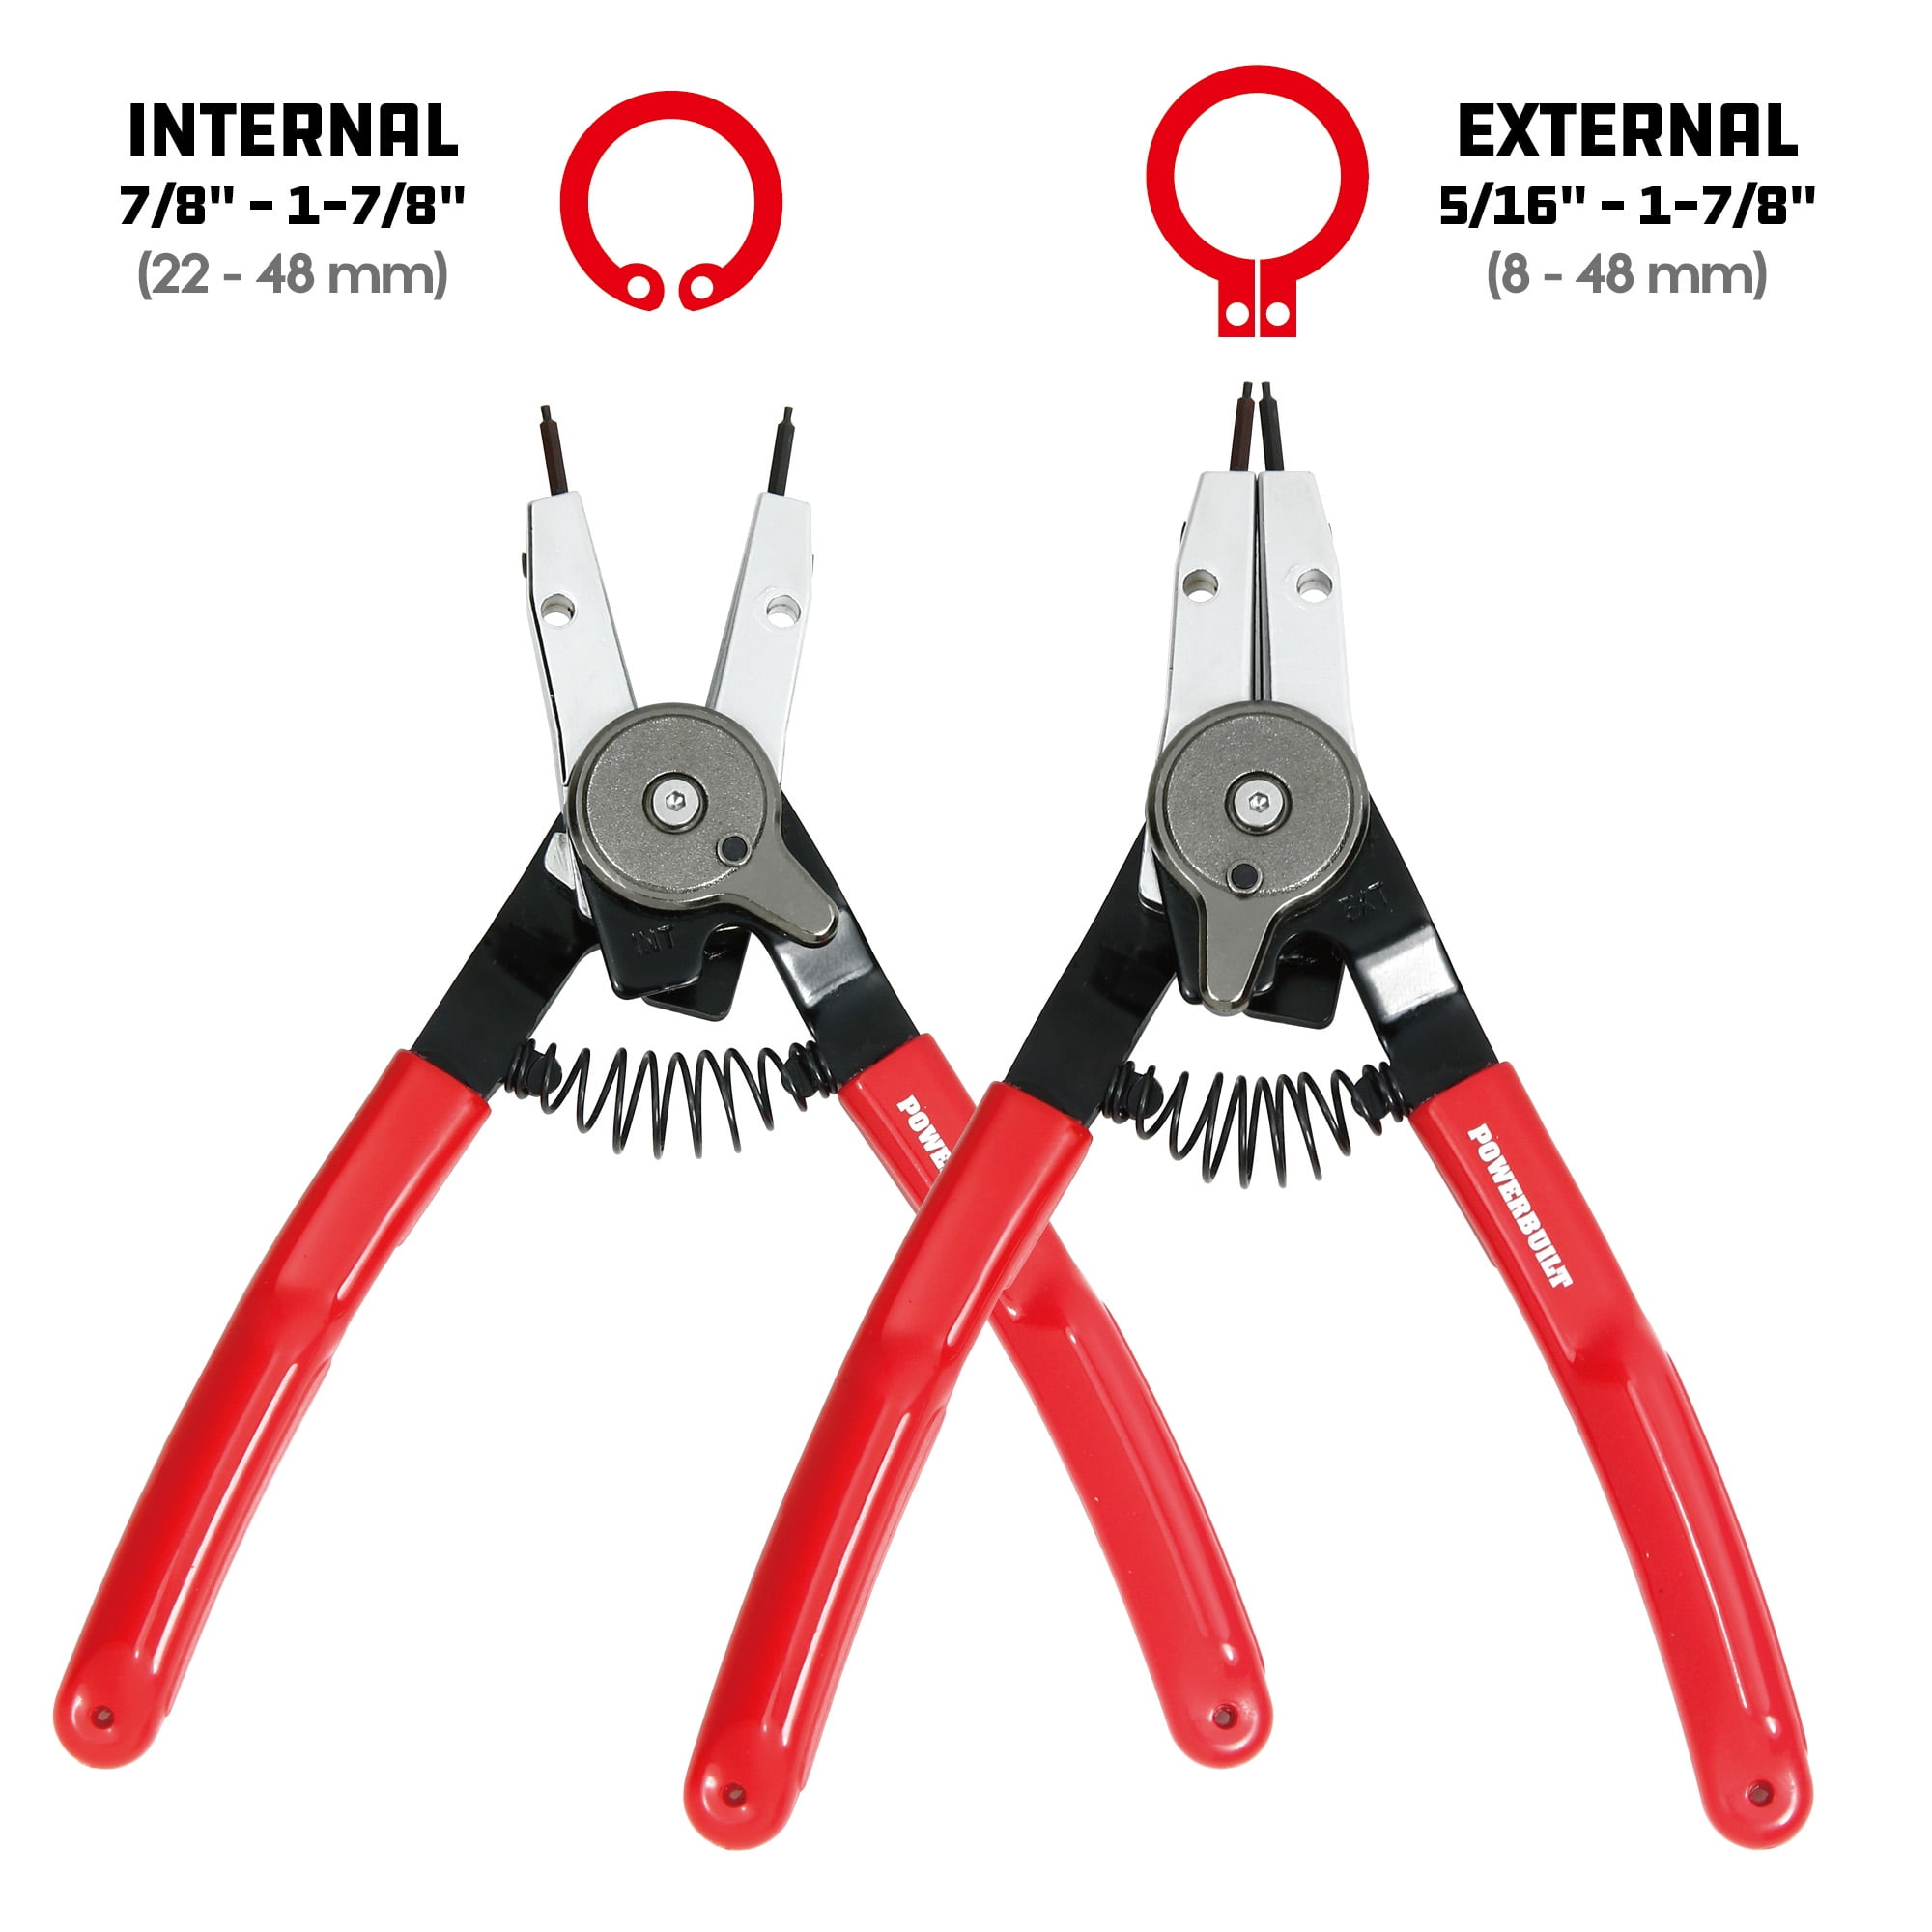 Internal/External Snap Ring Pliers Set For Use with All Vehicles OTC 10 Piece 